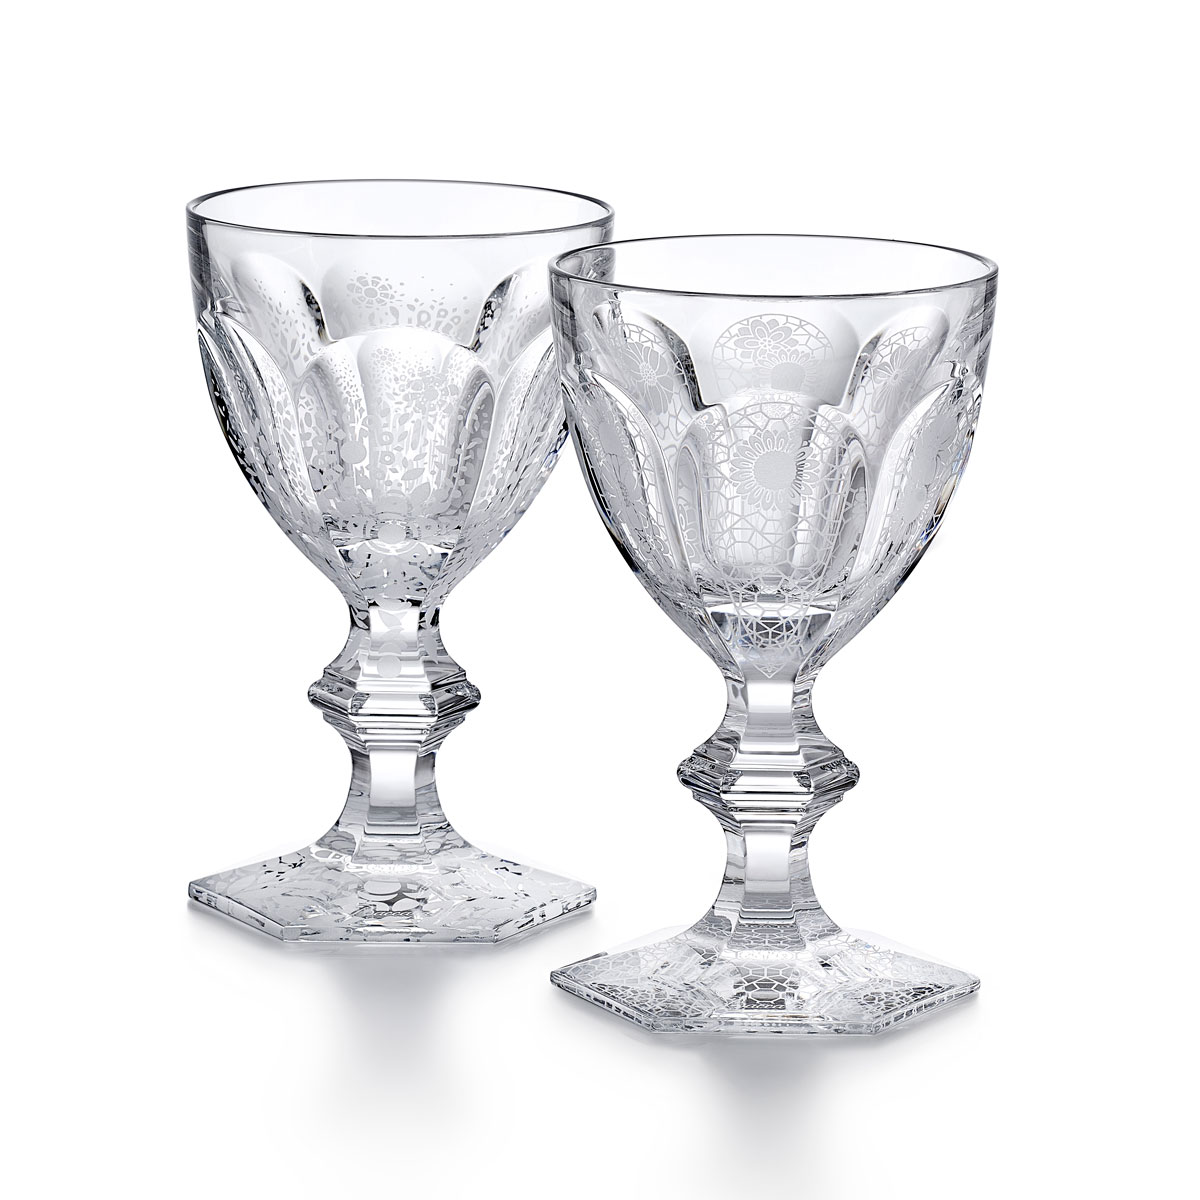 Baccarat Crystal Harcourt Etched Wine Glass #3, Pair